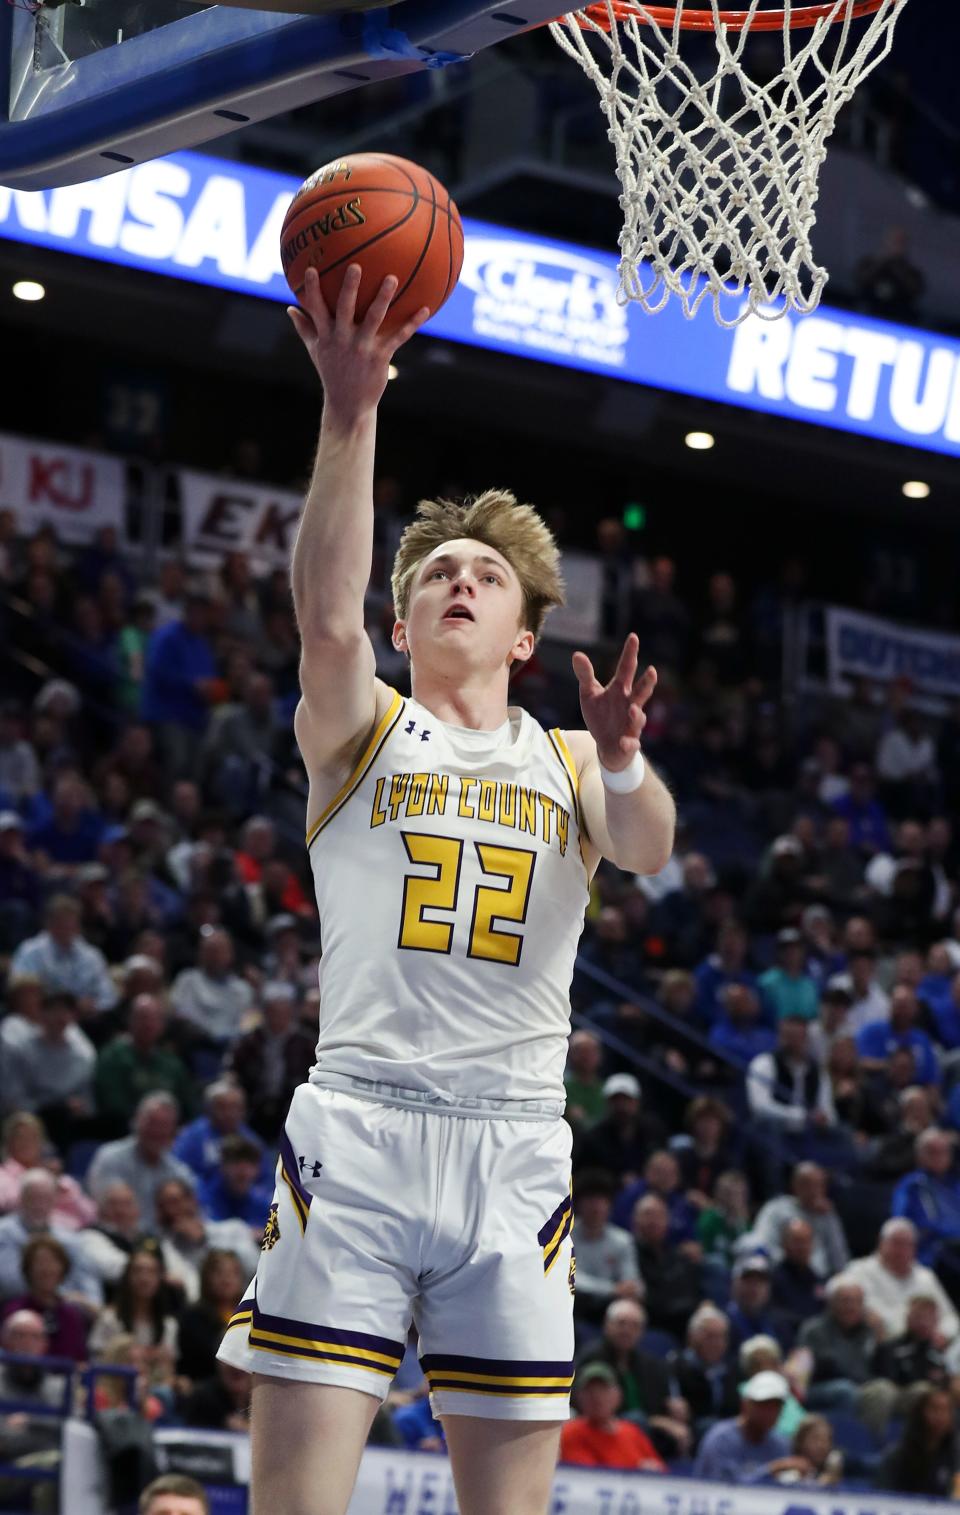 Lyon County’s Brady Shoulders (22) hits a layup against Newport during the Sweet 16 tournament at Rupp Arena in Lexington, Ky. on Mar. 16, 2023.  